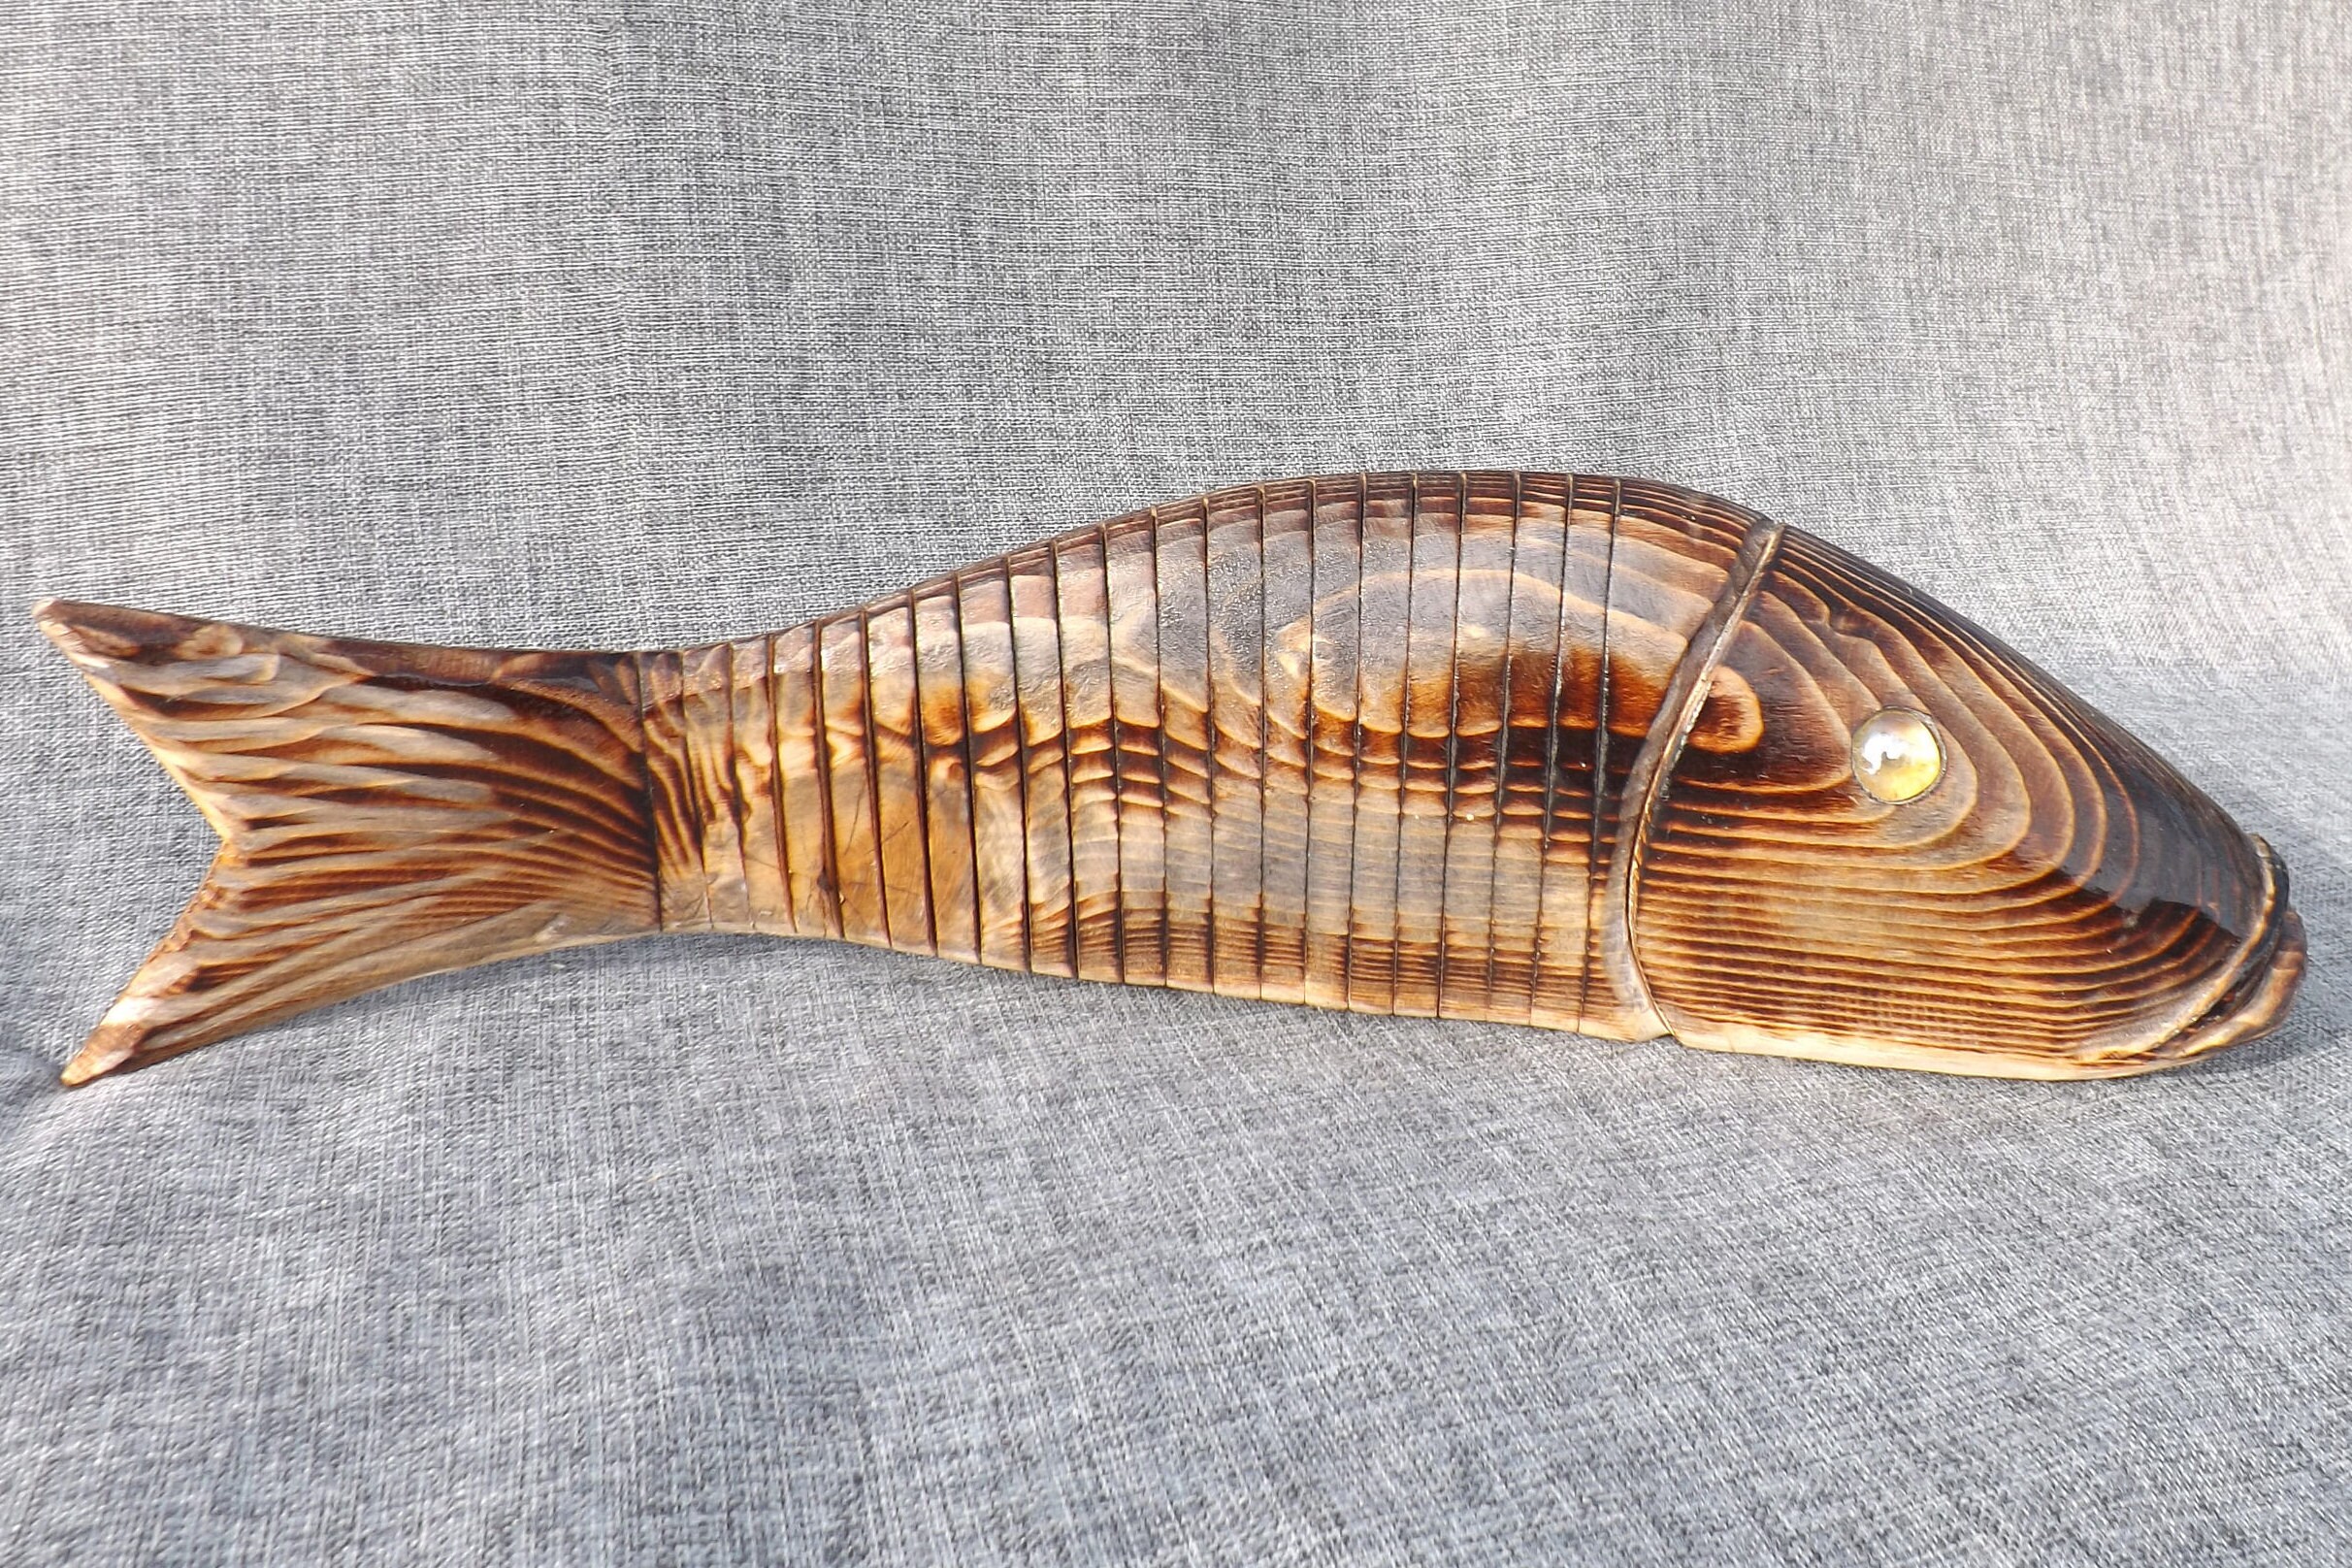 Handmade Wooden Carp Fish With Realistic Movement 